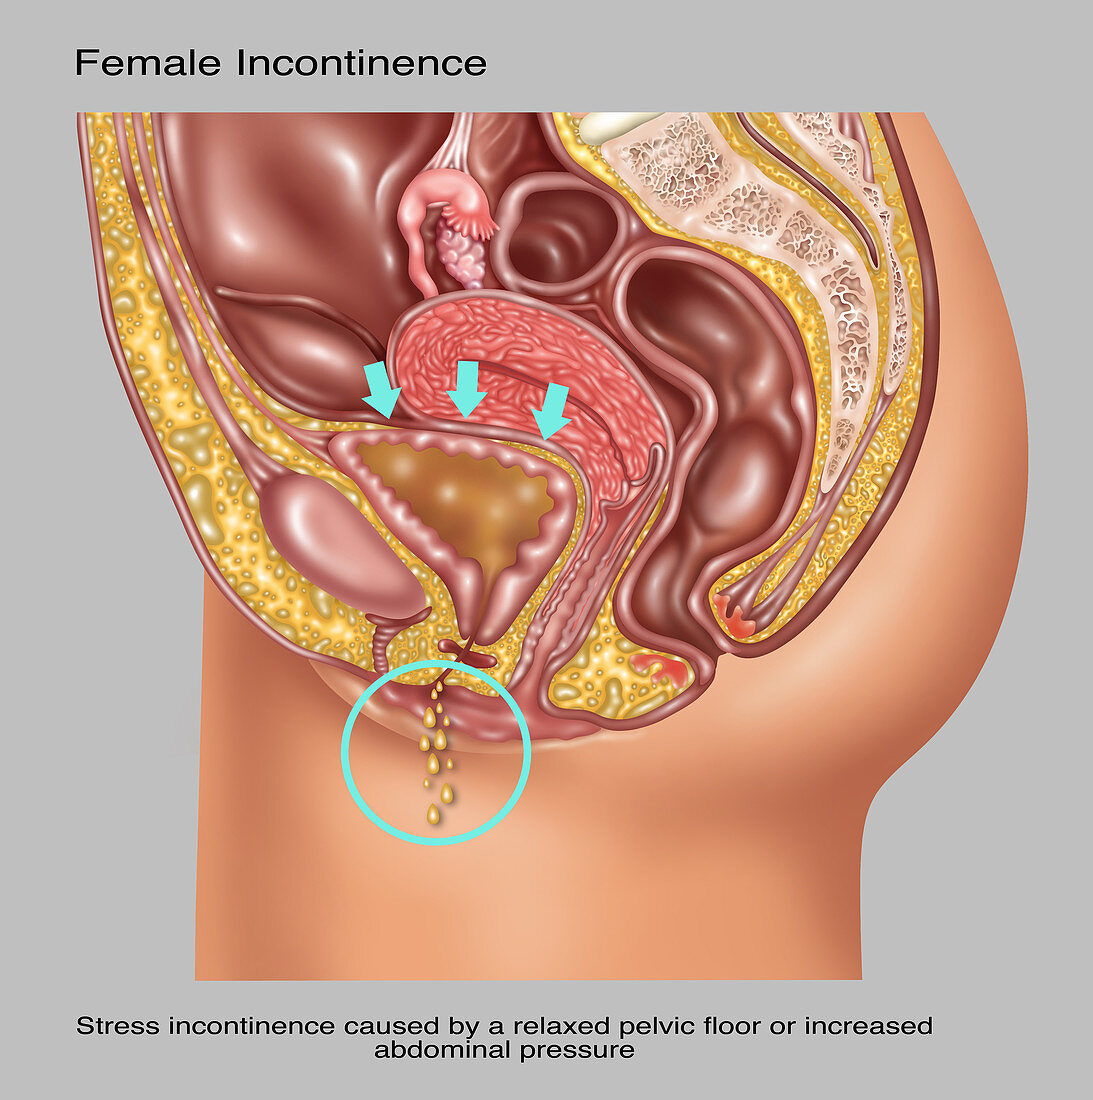 Stress Incontinence in Female Anatomy